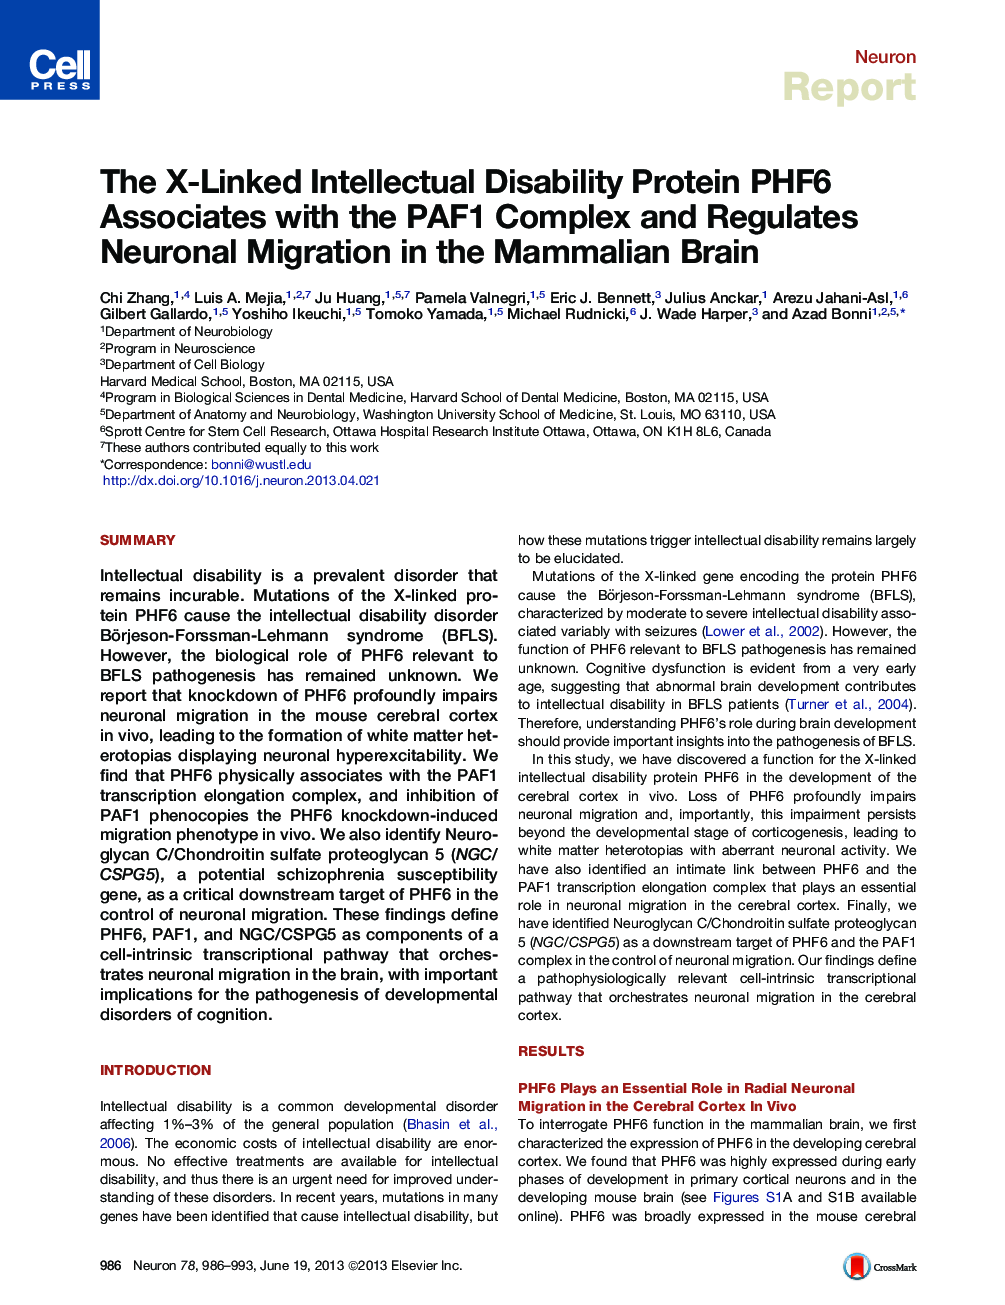 The X-Linked Intellectual Disability Protein PHF6 Associates with the PAF1 Complex and Regulates Neuronal Migration in the Mammalian Brain